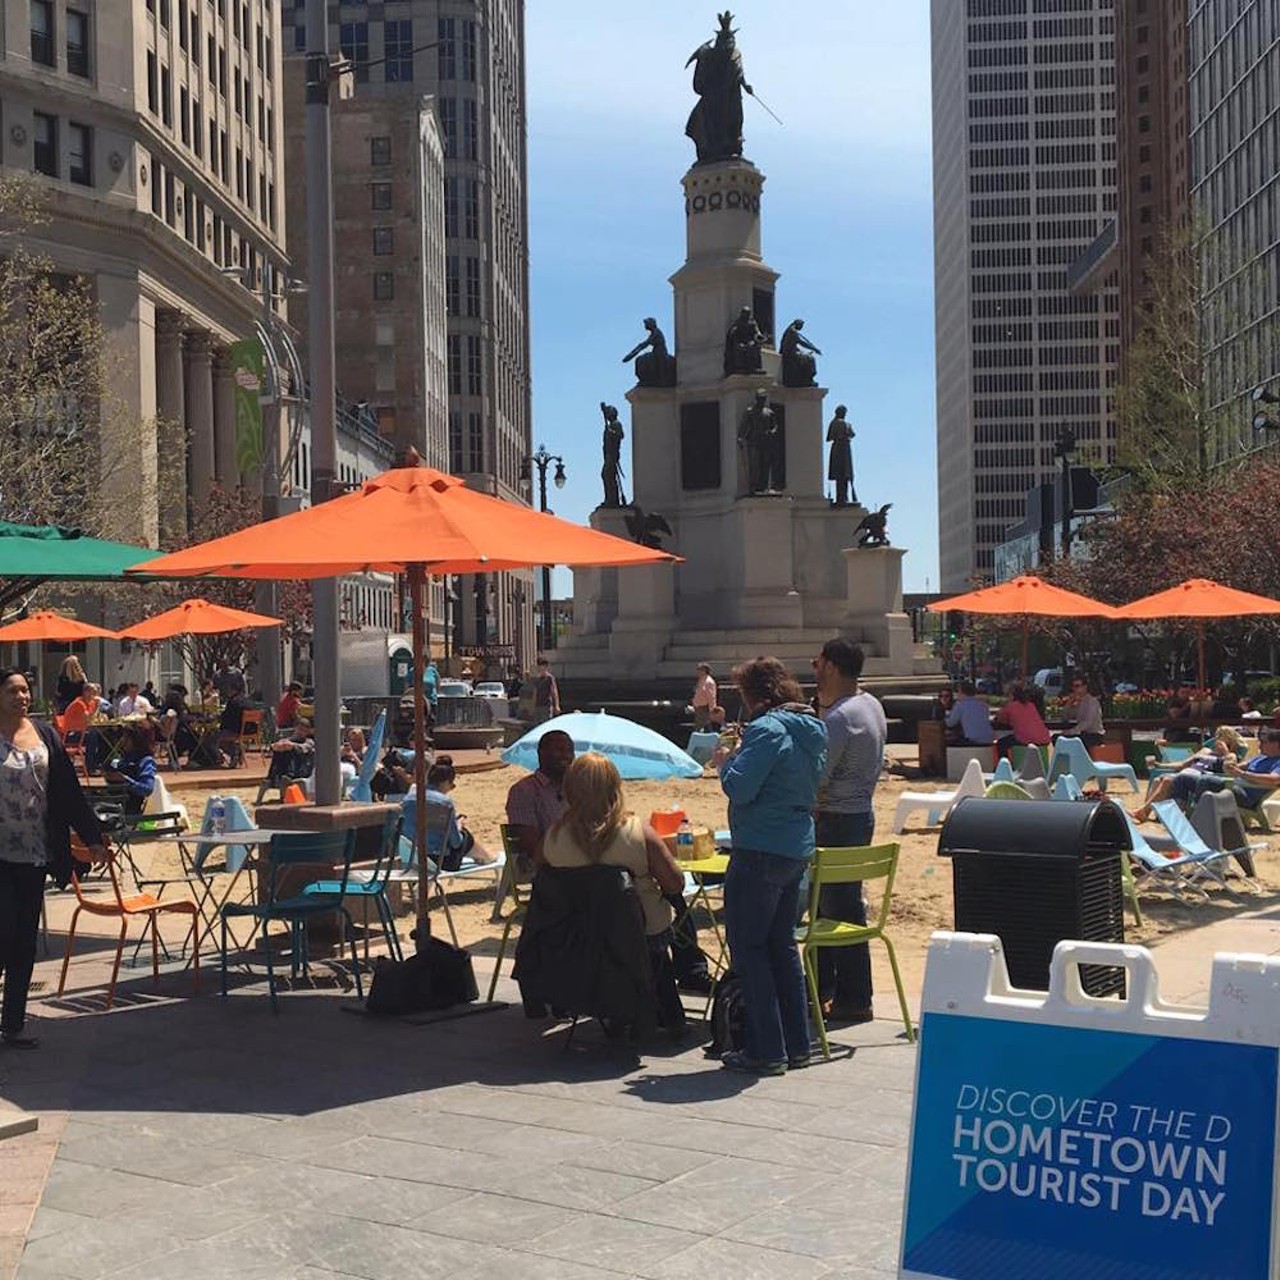 Where to go: Campus Martius
What to do: Eat and hangout
Why it made the list: Located in the heart of downtown, Campus Martius is within walking distance of a half dozen food trucks. And there&#146;s a beach if you want to stick your toes in the sand. Photo: Campus Martius Park Facebook